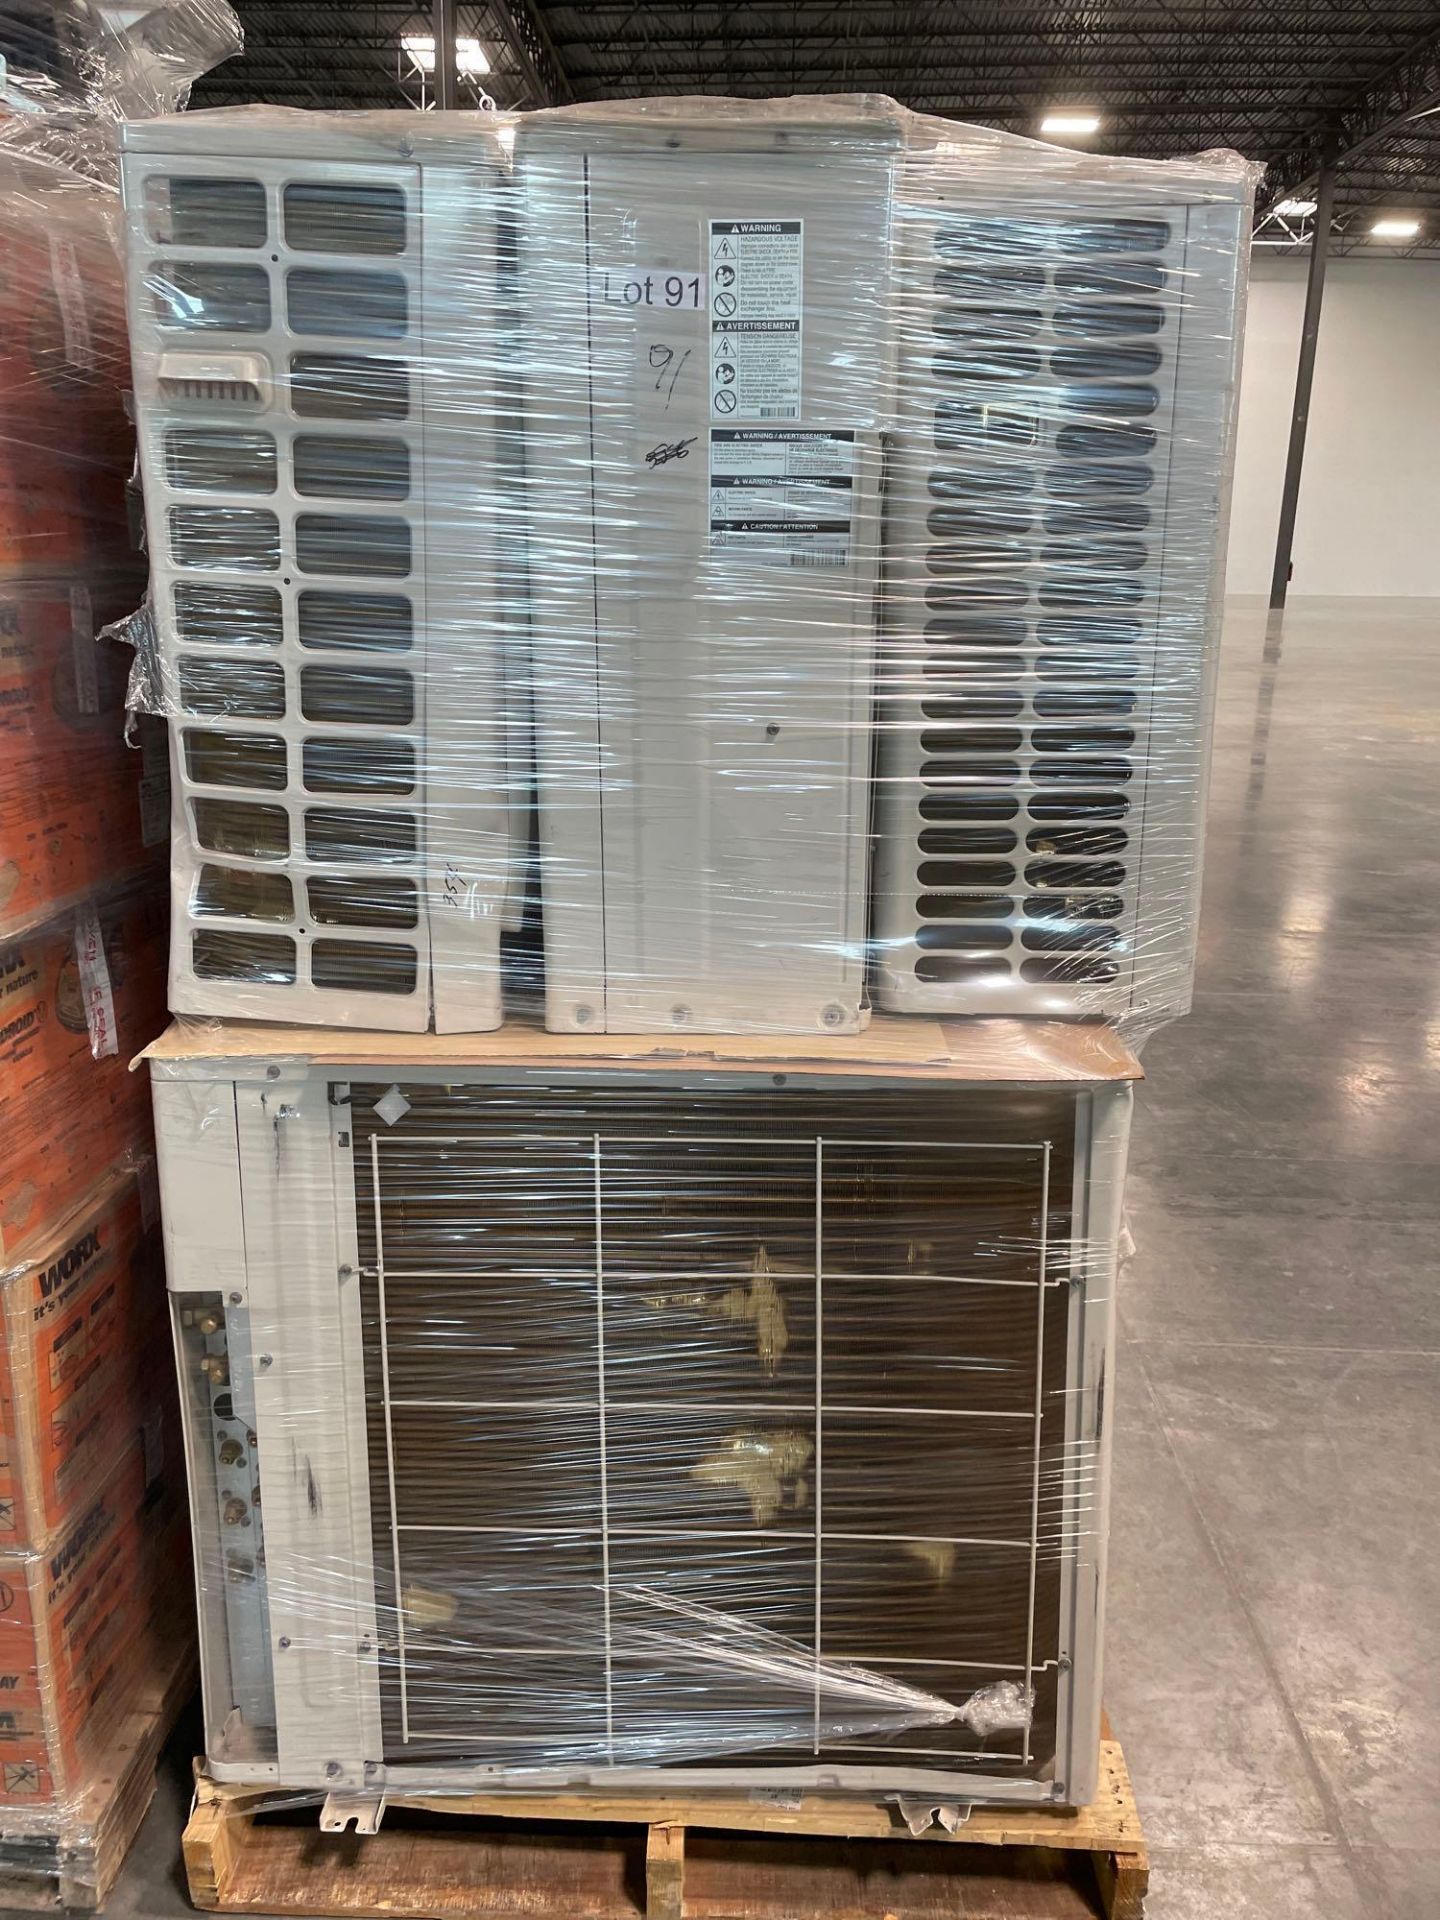 pallet of multiple LG dual inverter industrial AC units